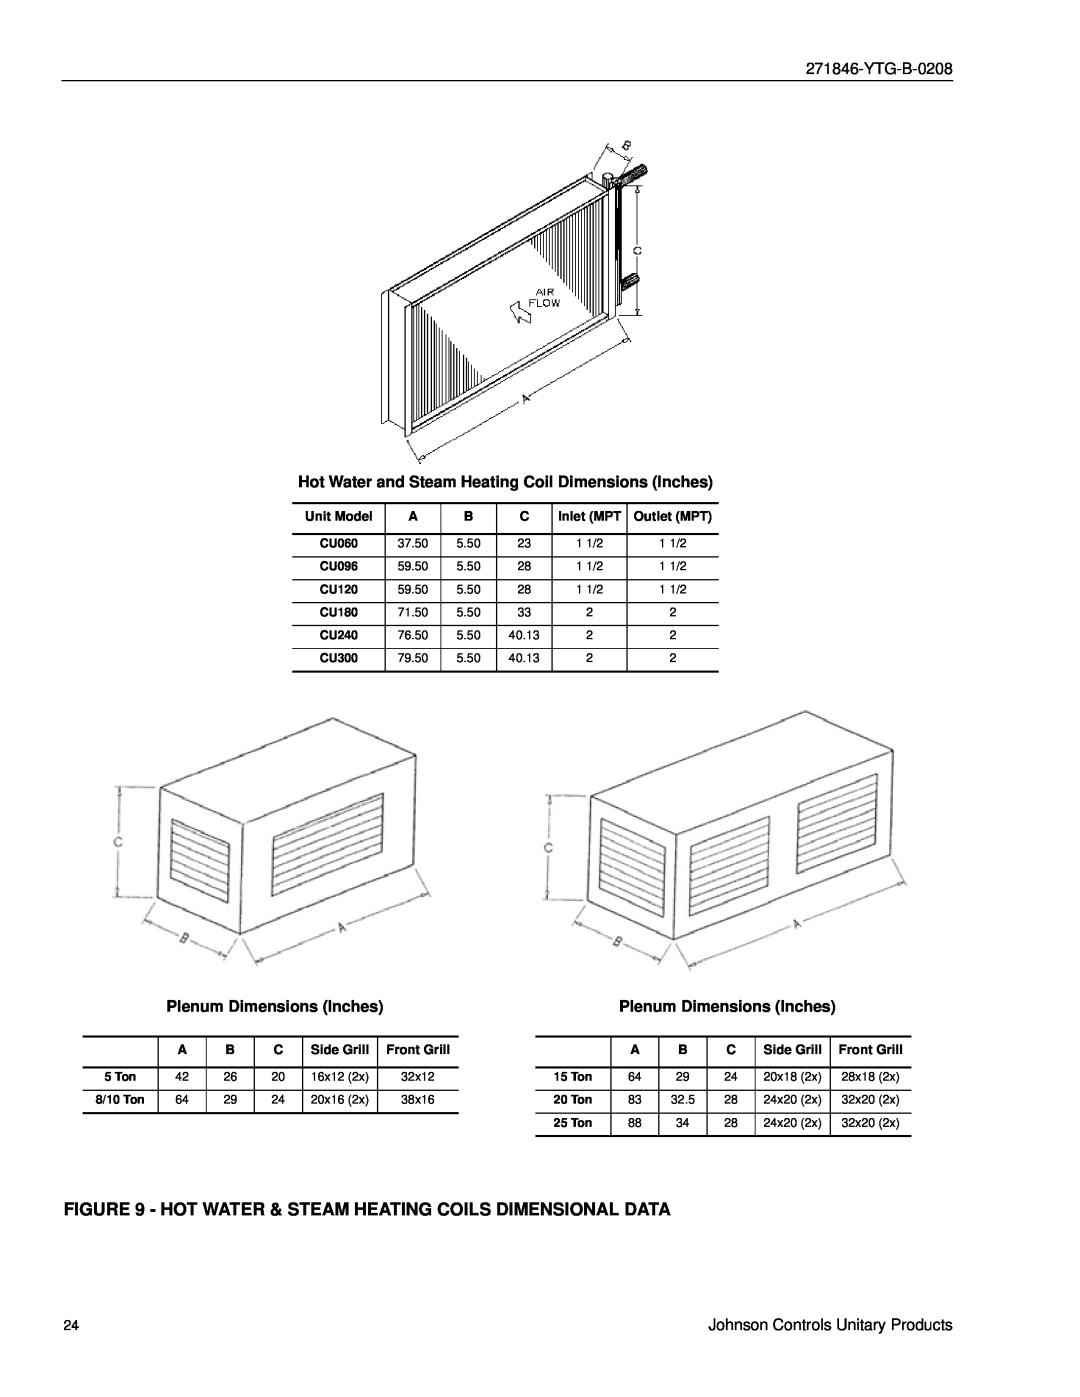 York CU060 - 300 manual Plenum Dimensions Inches, Unit Model, Inlet MPT, Outlet MPT, Side Grill, Front Grill 